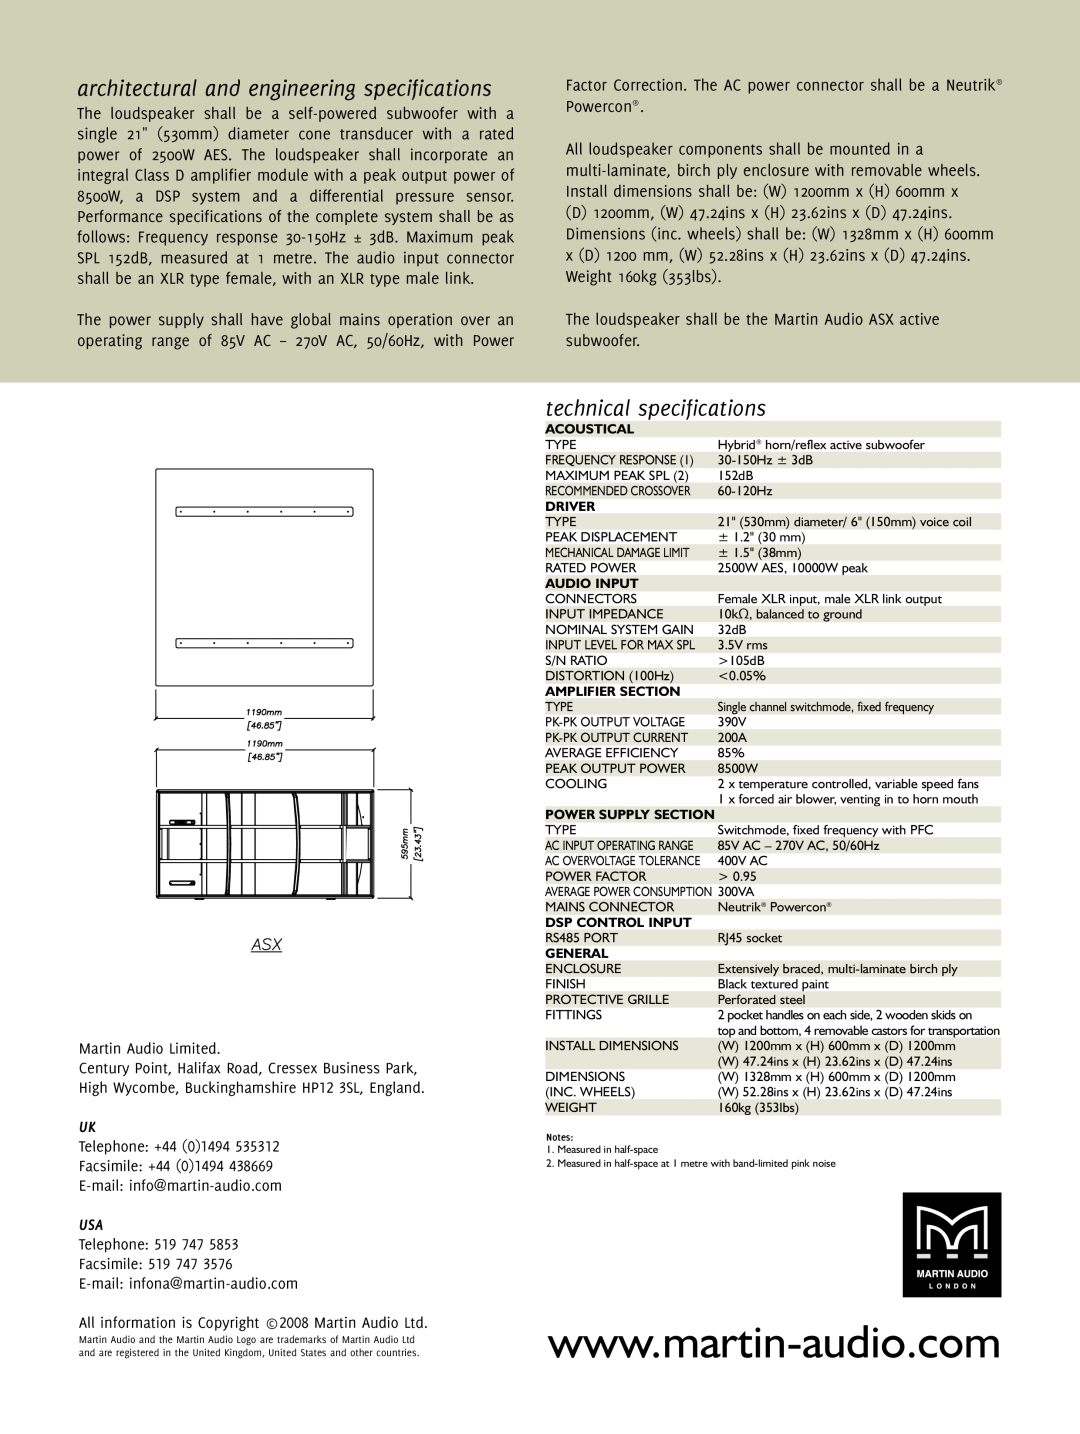 Martin Audio ASX manual architectural and engineering specifications, technical specifications 